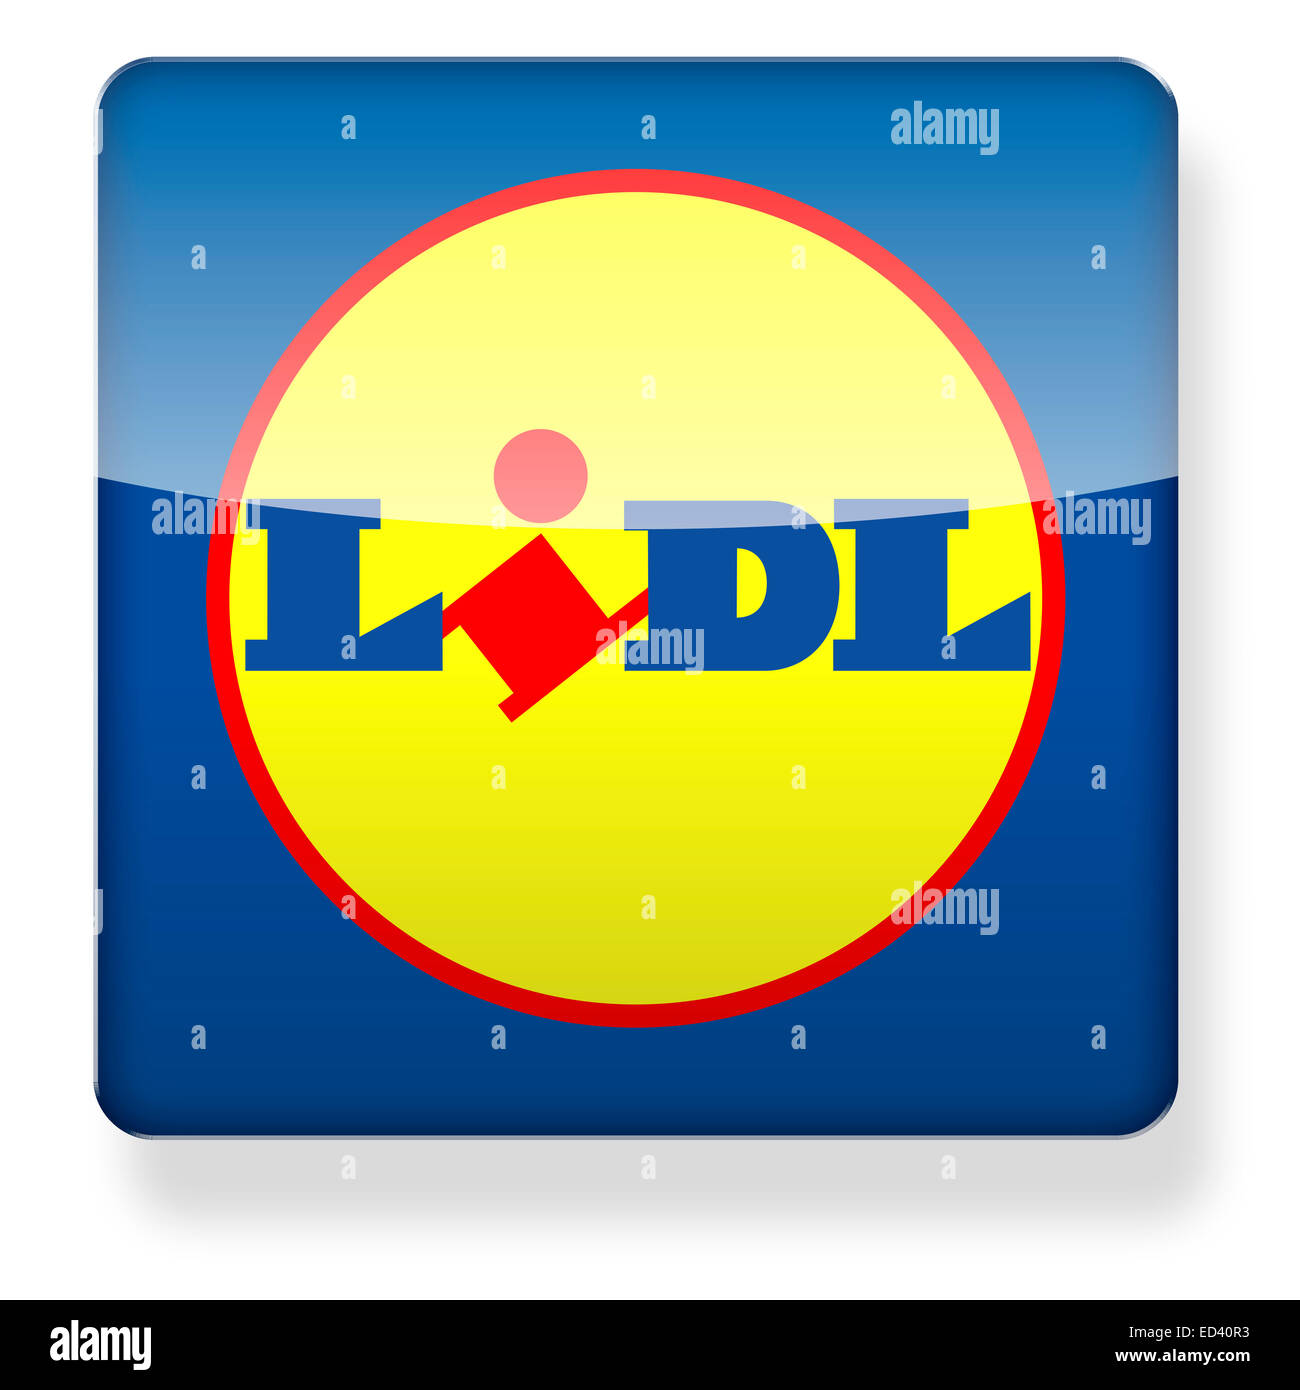 Lidl logo as an app icon. Clipping path included. Stock Photo